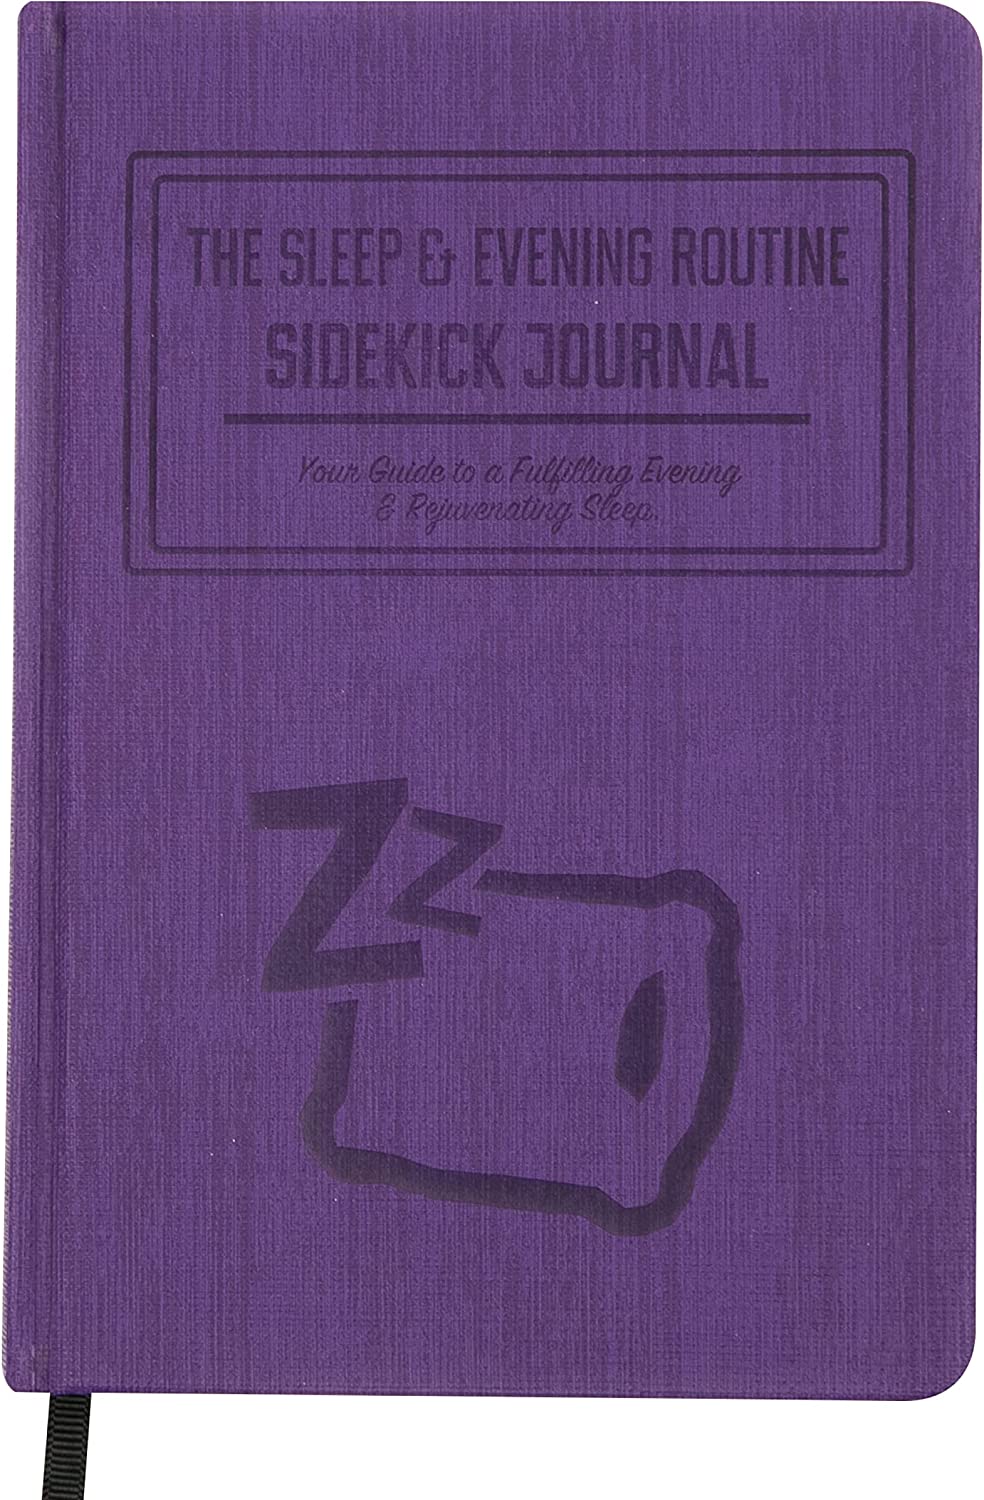 Sleep & Evening Routine Sidekick Journal by Habit Nest – A Journal That Coaches You Through maximizing Sleep Quality & Building a Nightly Routine That Improves Your Quality of Life.